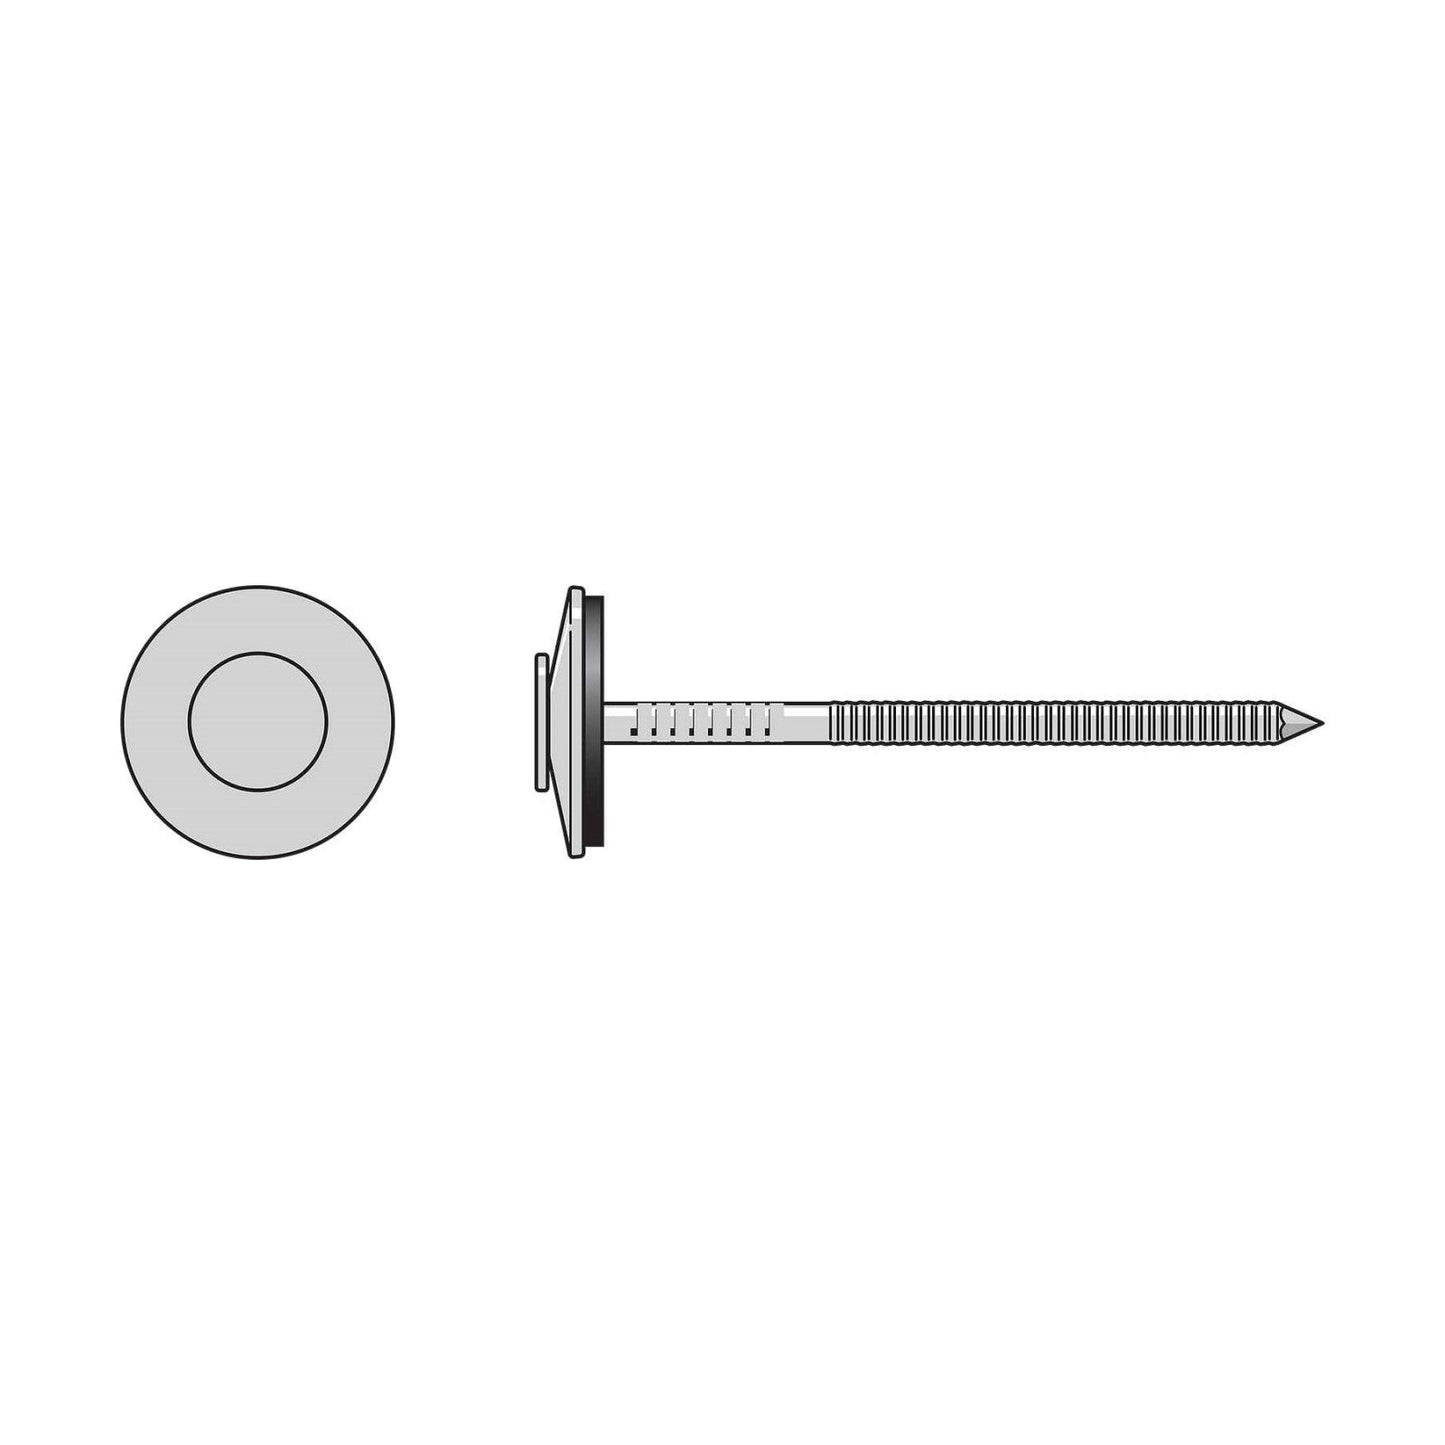 Simpson T10A200X07 0.131 x 2" Annular Ring Shank Nail with EPDM Washer - 316 Stainless, 1lb. Pkg